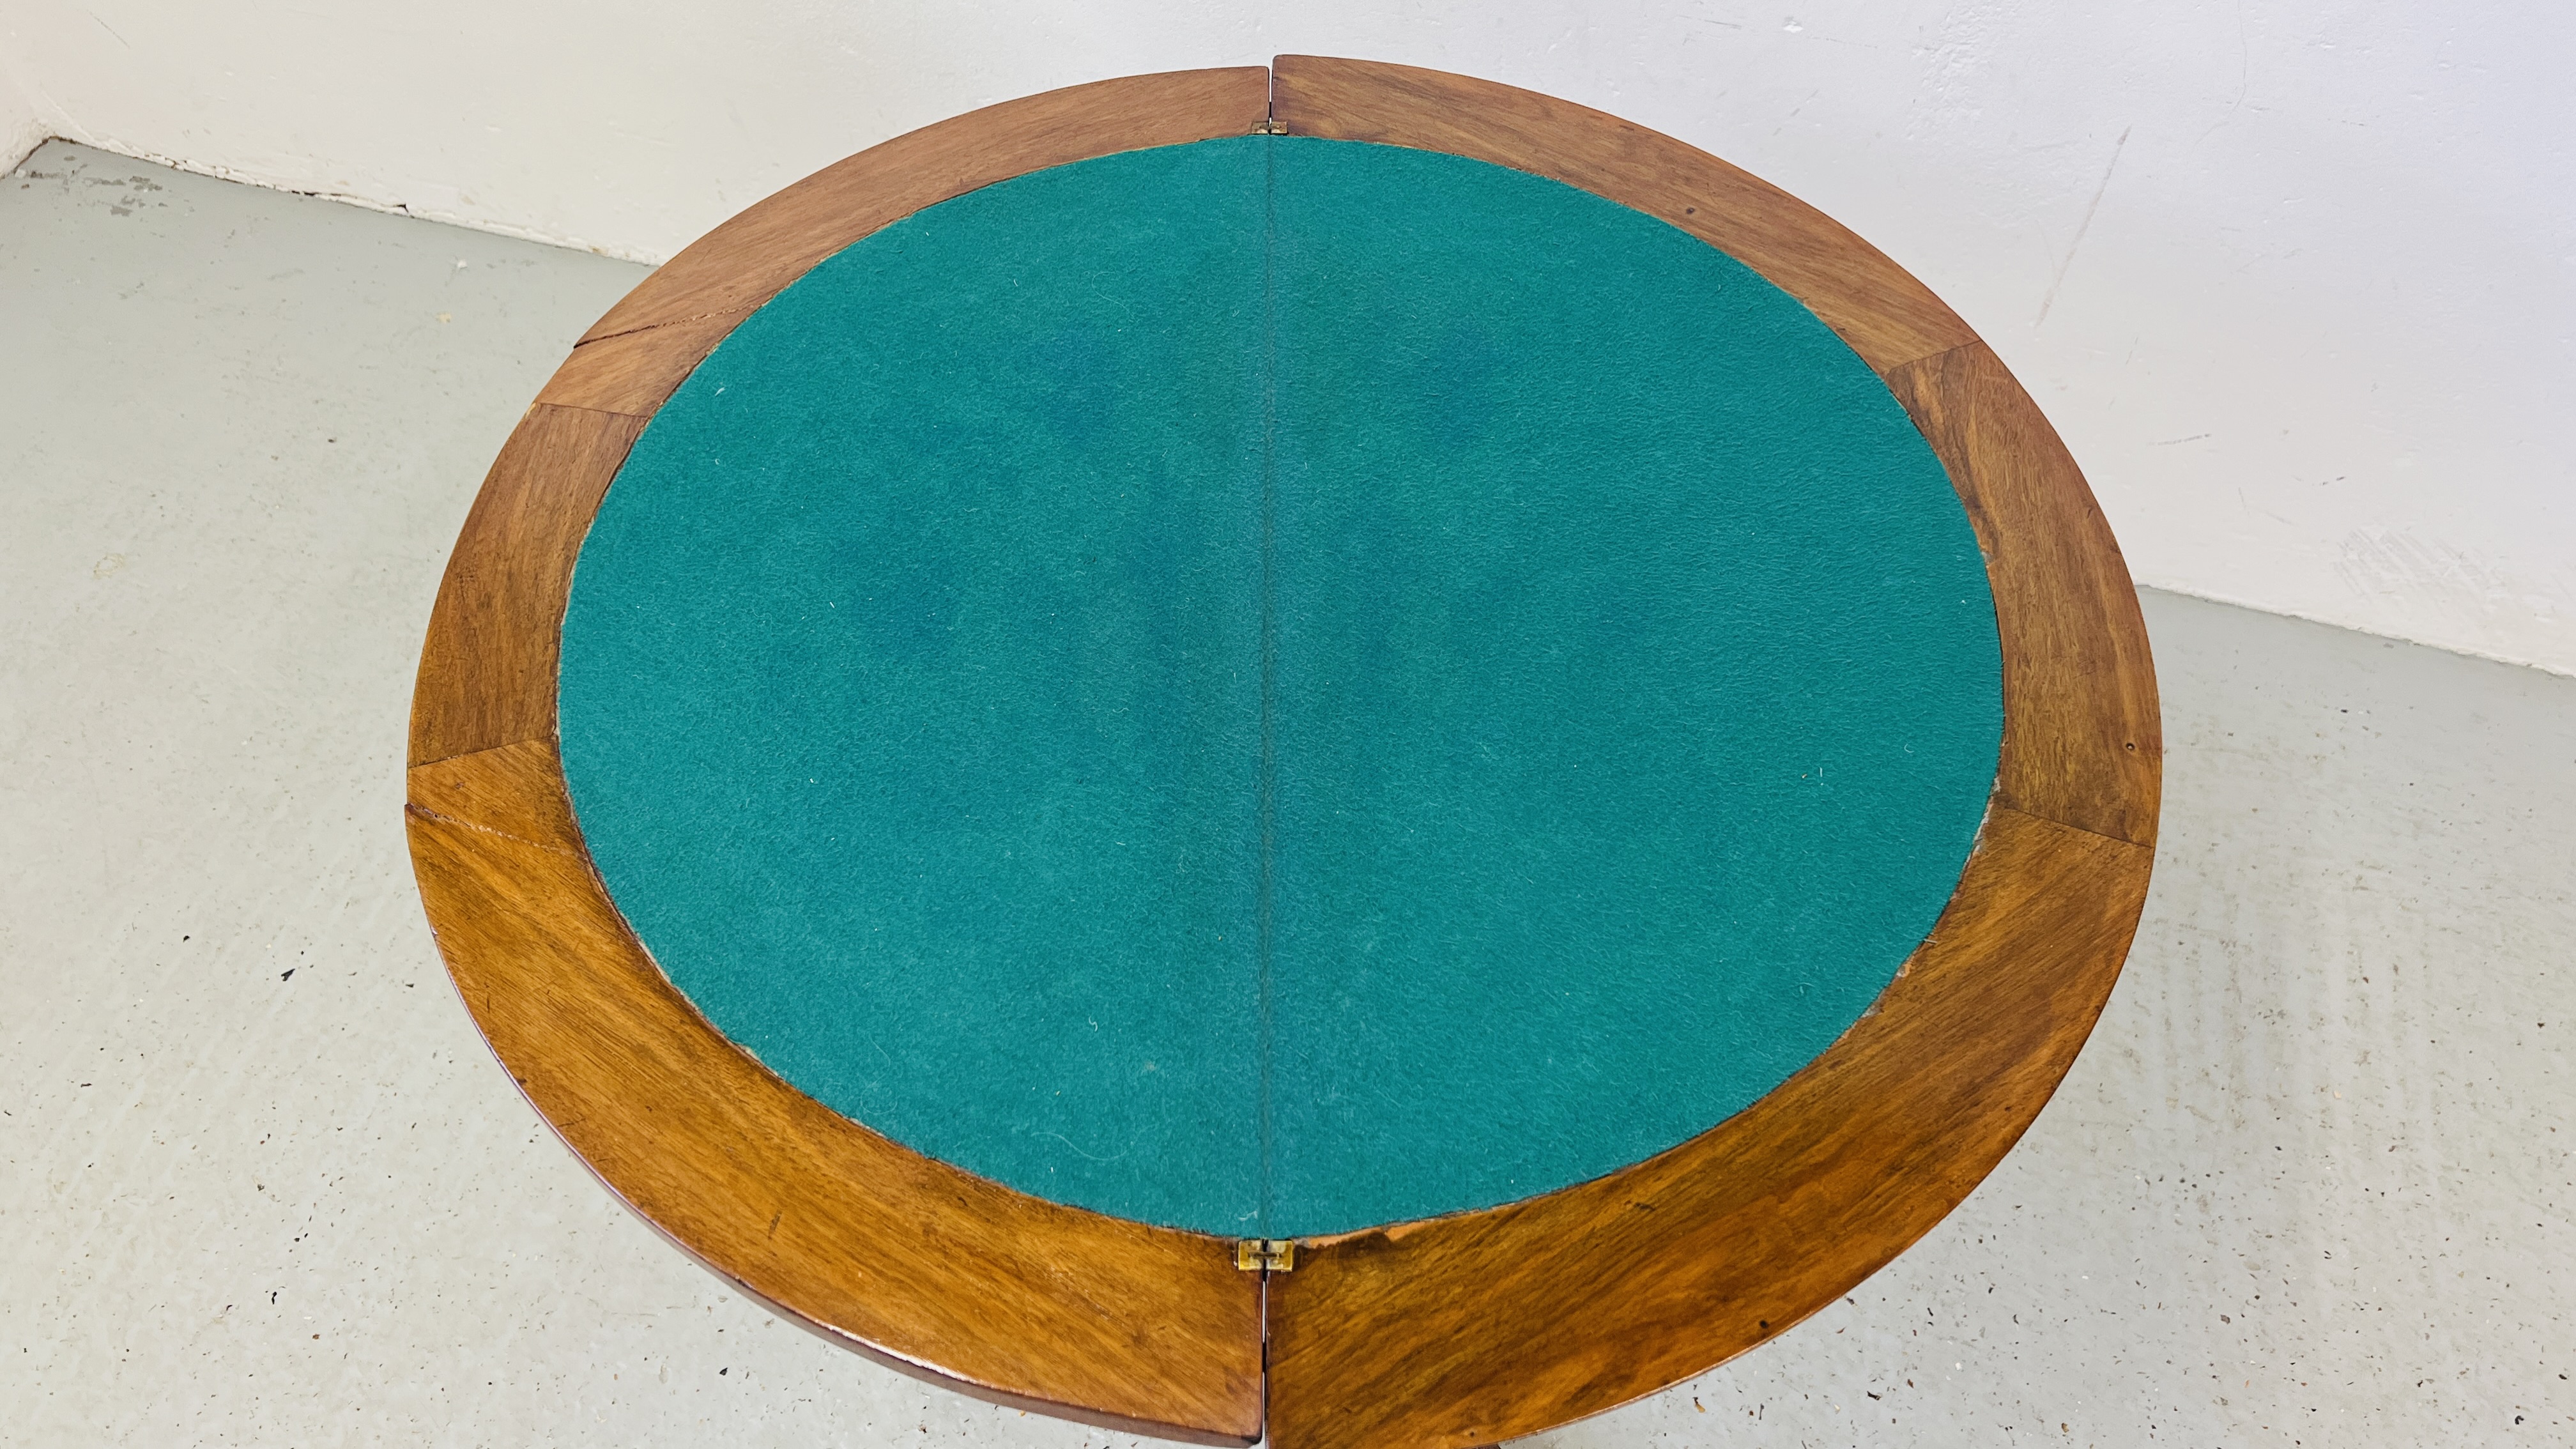 EDWARDIAN WALNUT SINGLE PEDESTAL CARD/GAMES TABLE WITH BAIZE INSERT INLAID DETAIL DIA. 92CM. - Image 9 of 10